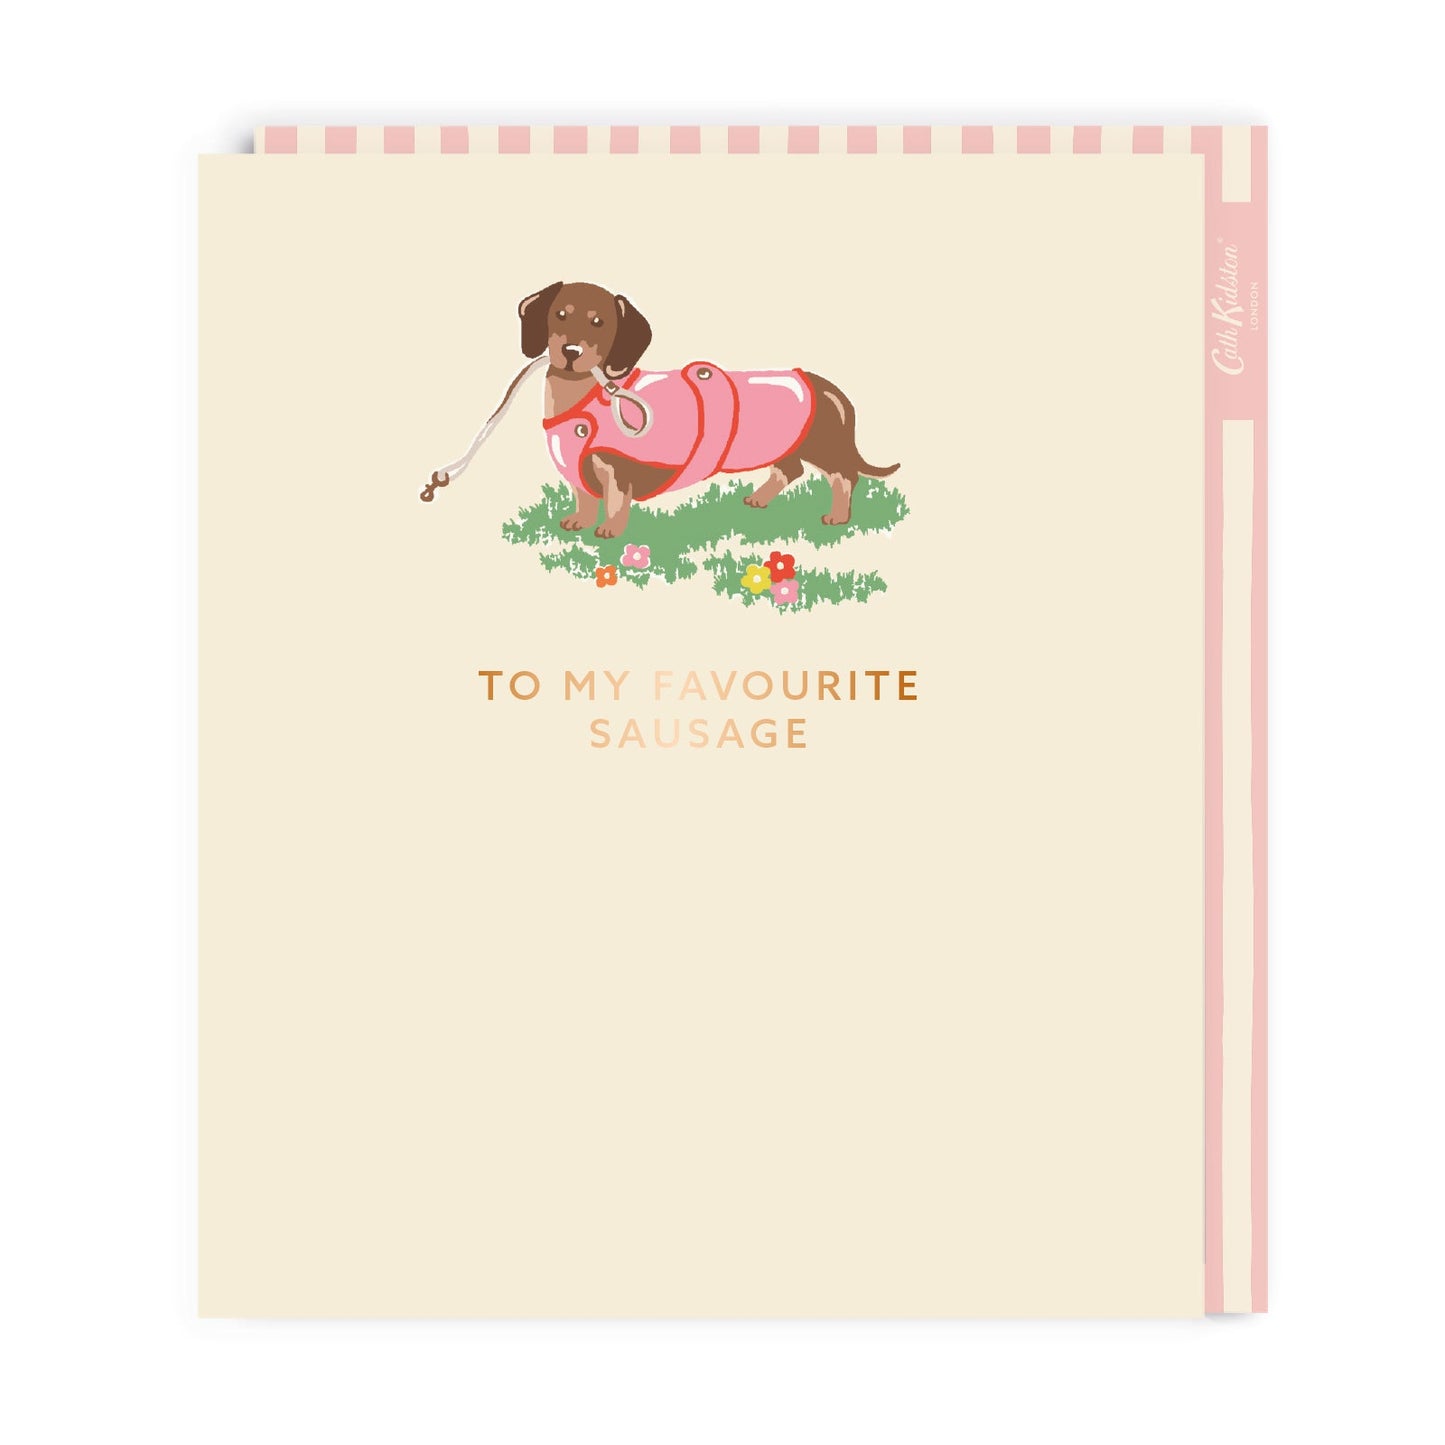 Greeting card with a Sausage Dog illustration and the caption To My Favourite Sausage